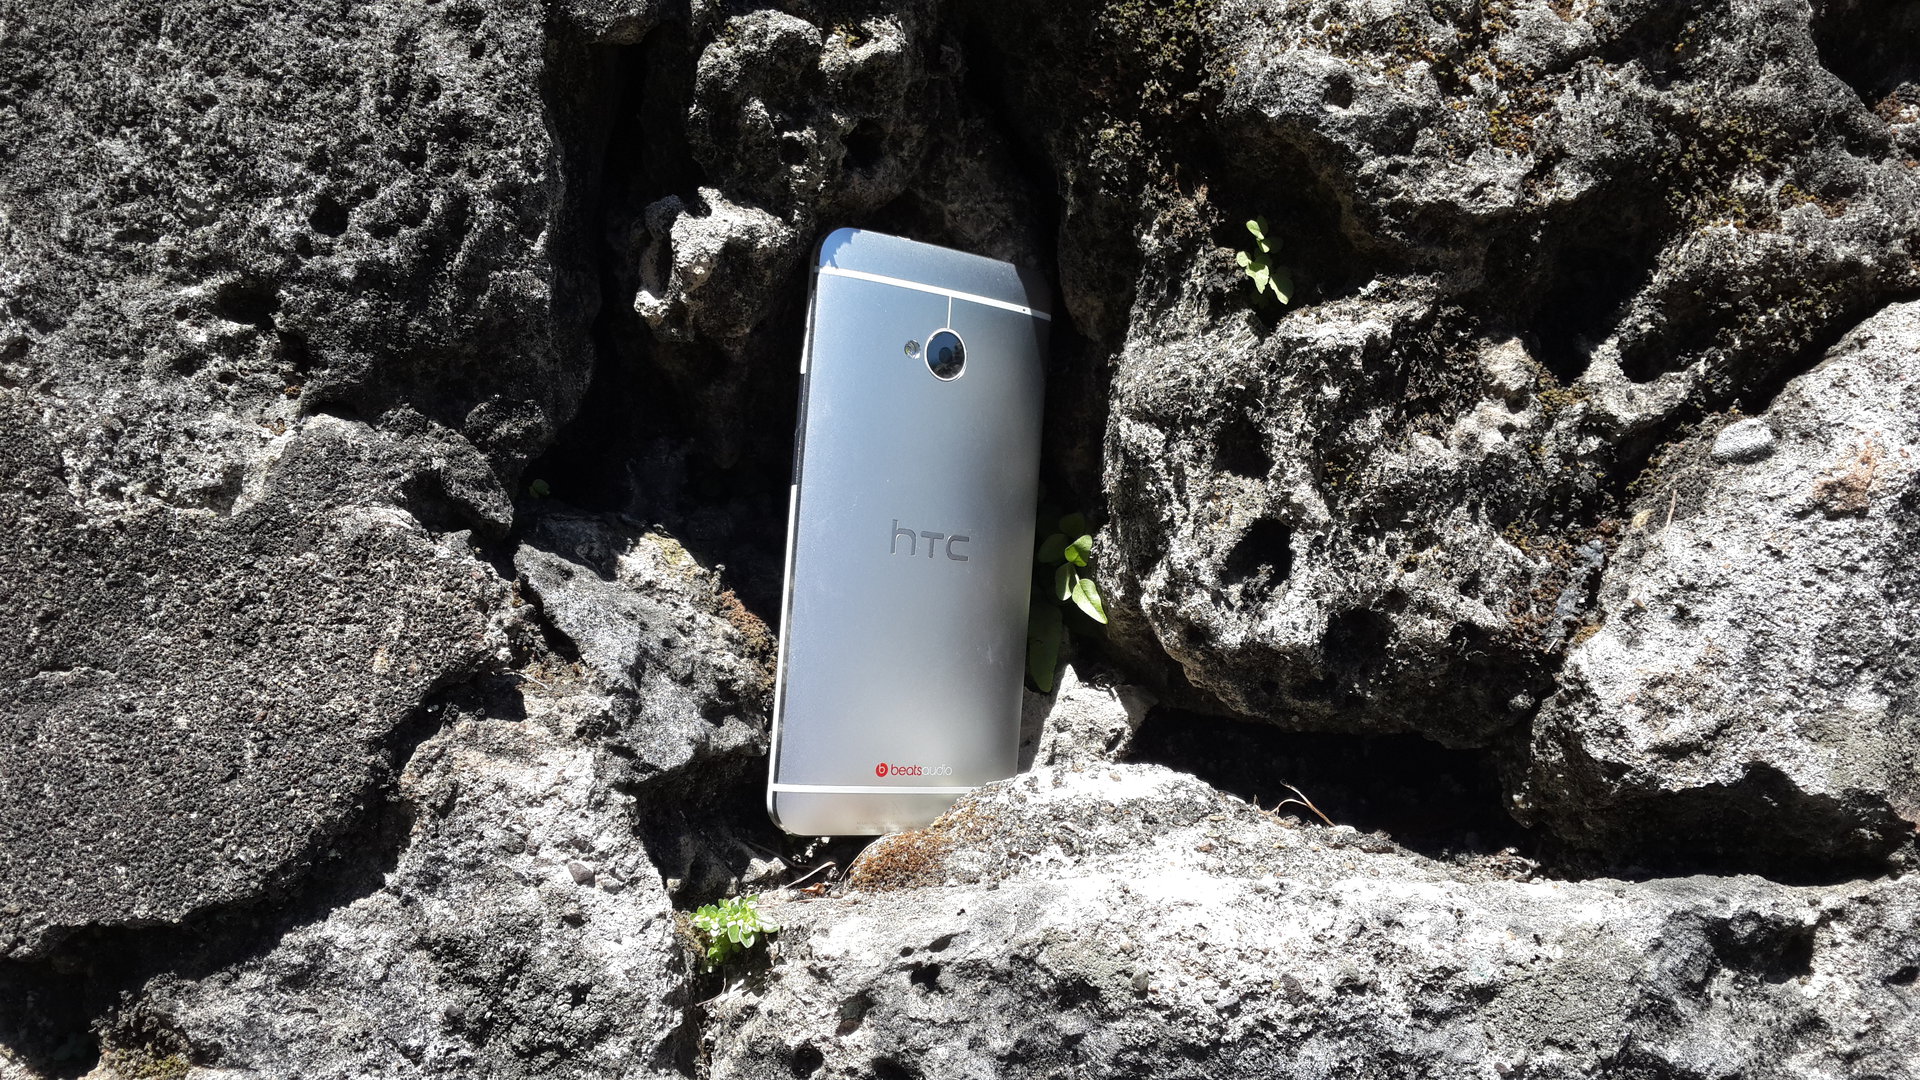 The Galaxy S4 photographs the HTC One.